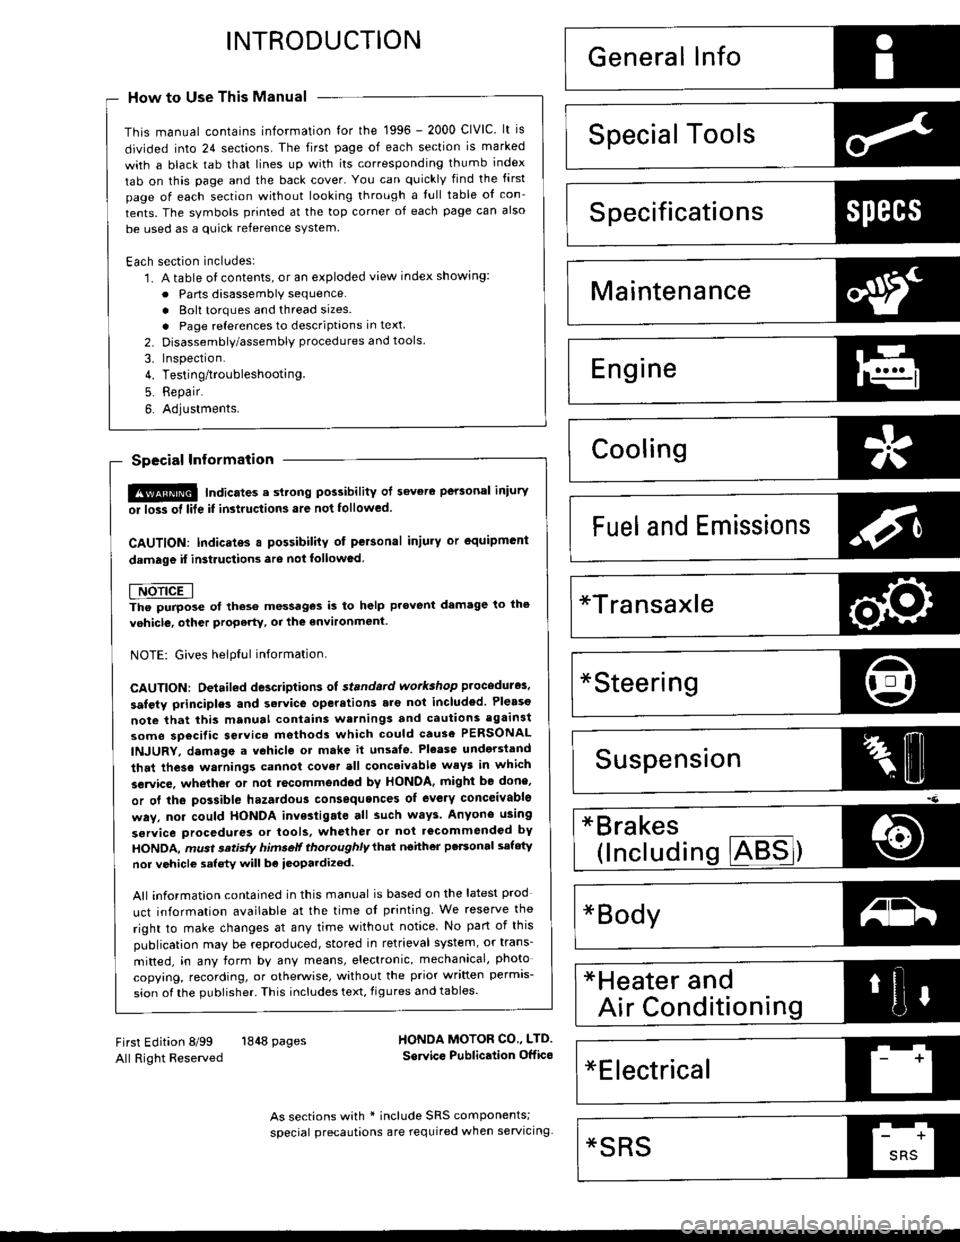 HONDA CIVIC 1999 6.G Workshop Manual INTRODUCTION
How to Use This Manual
This manual contains information for the 1996 - 2000 ClVlC. lt is
divided into 24 sections. The first page of each section is marked
with a black tab that lines up 